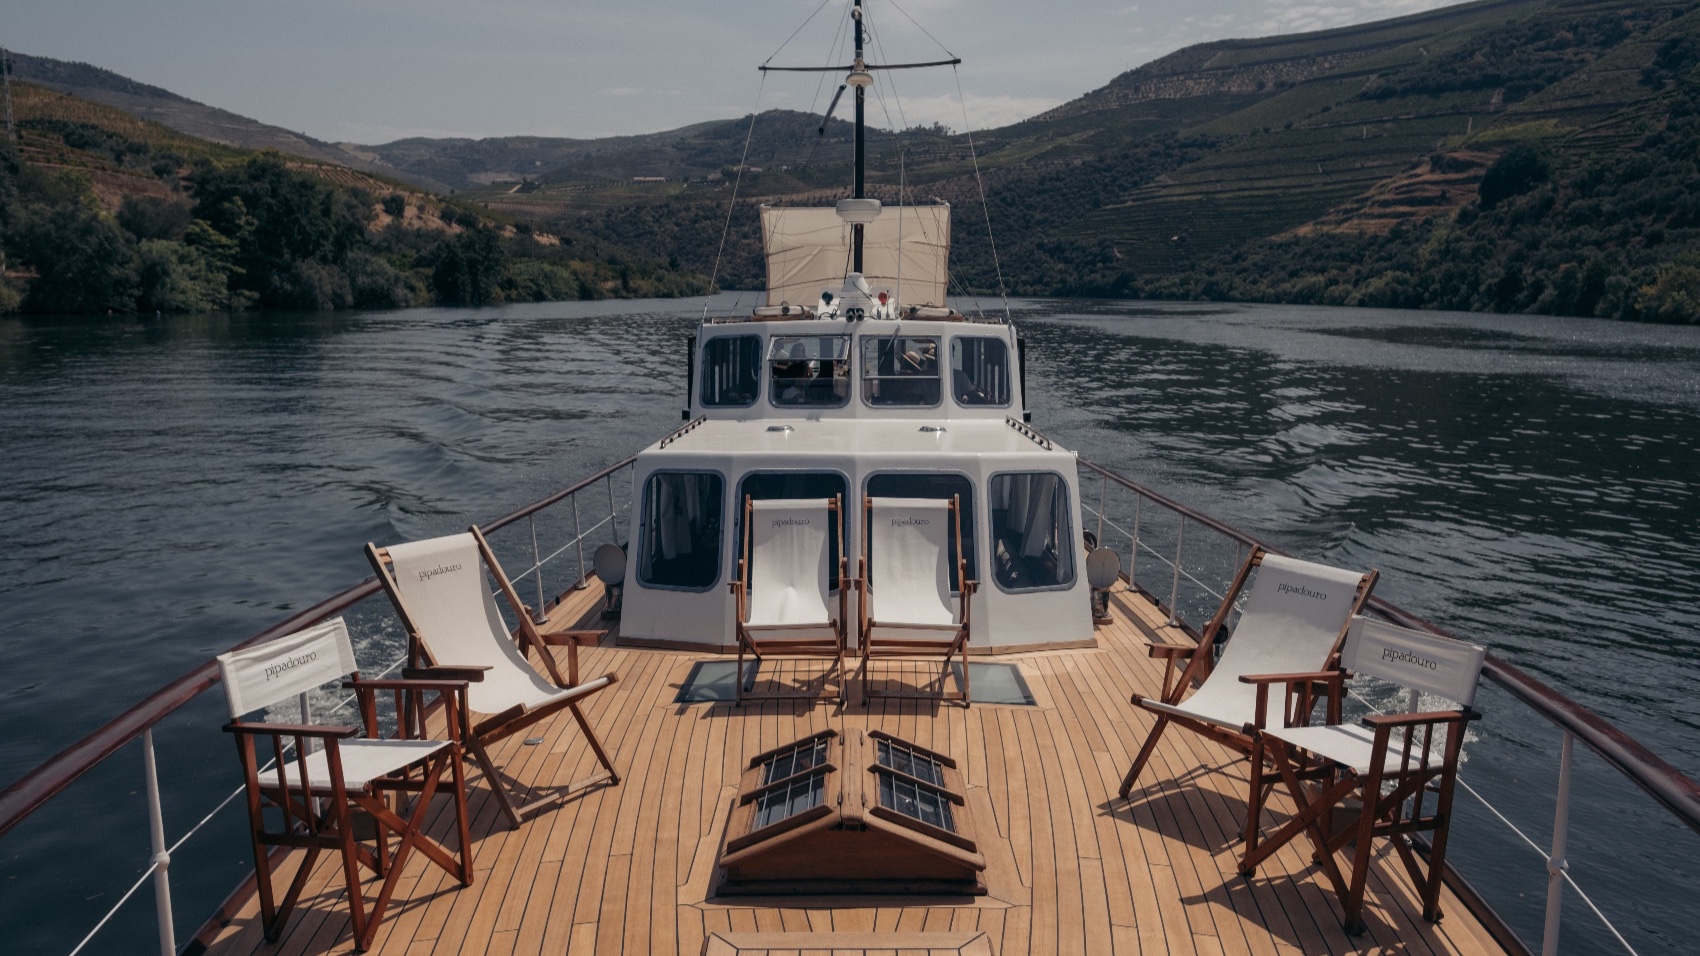 Douro Valley for Wine Lovers douro cruise